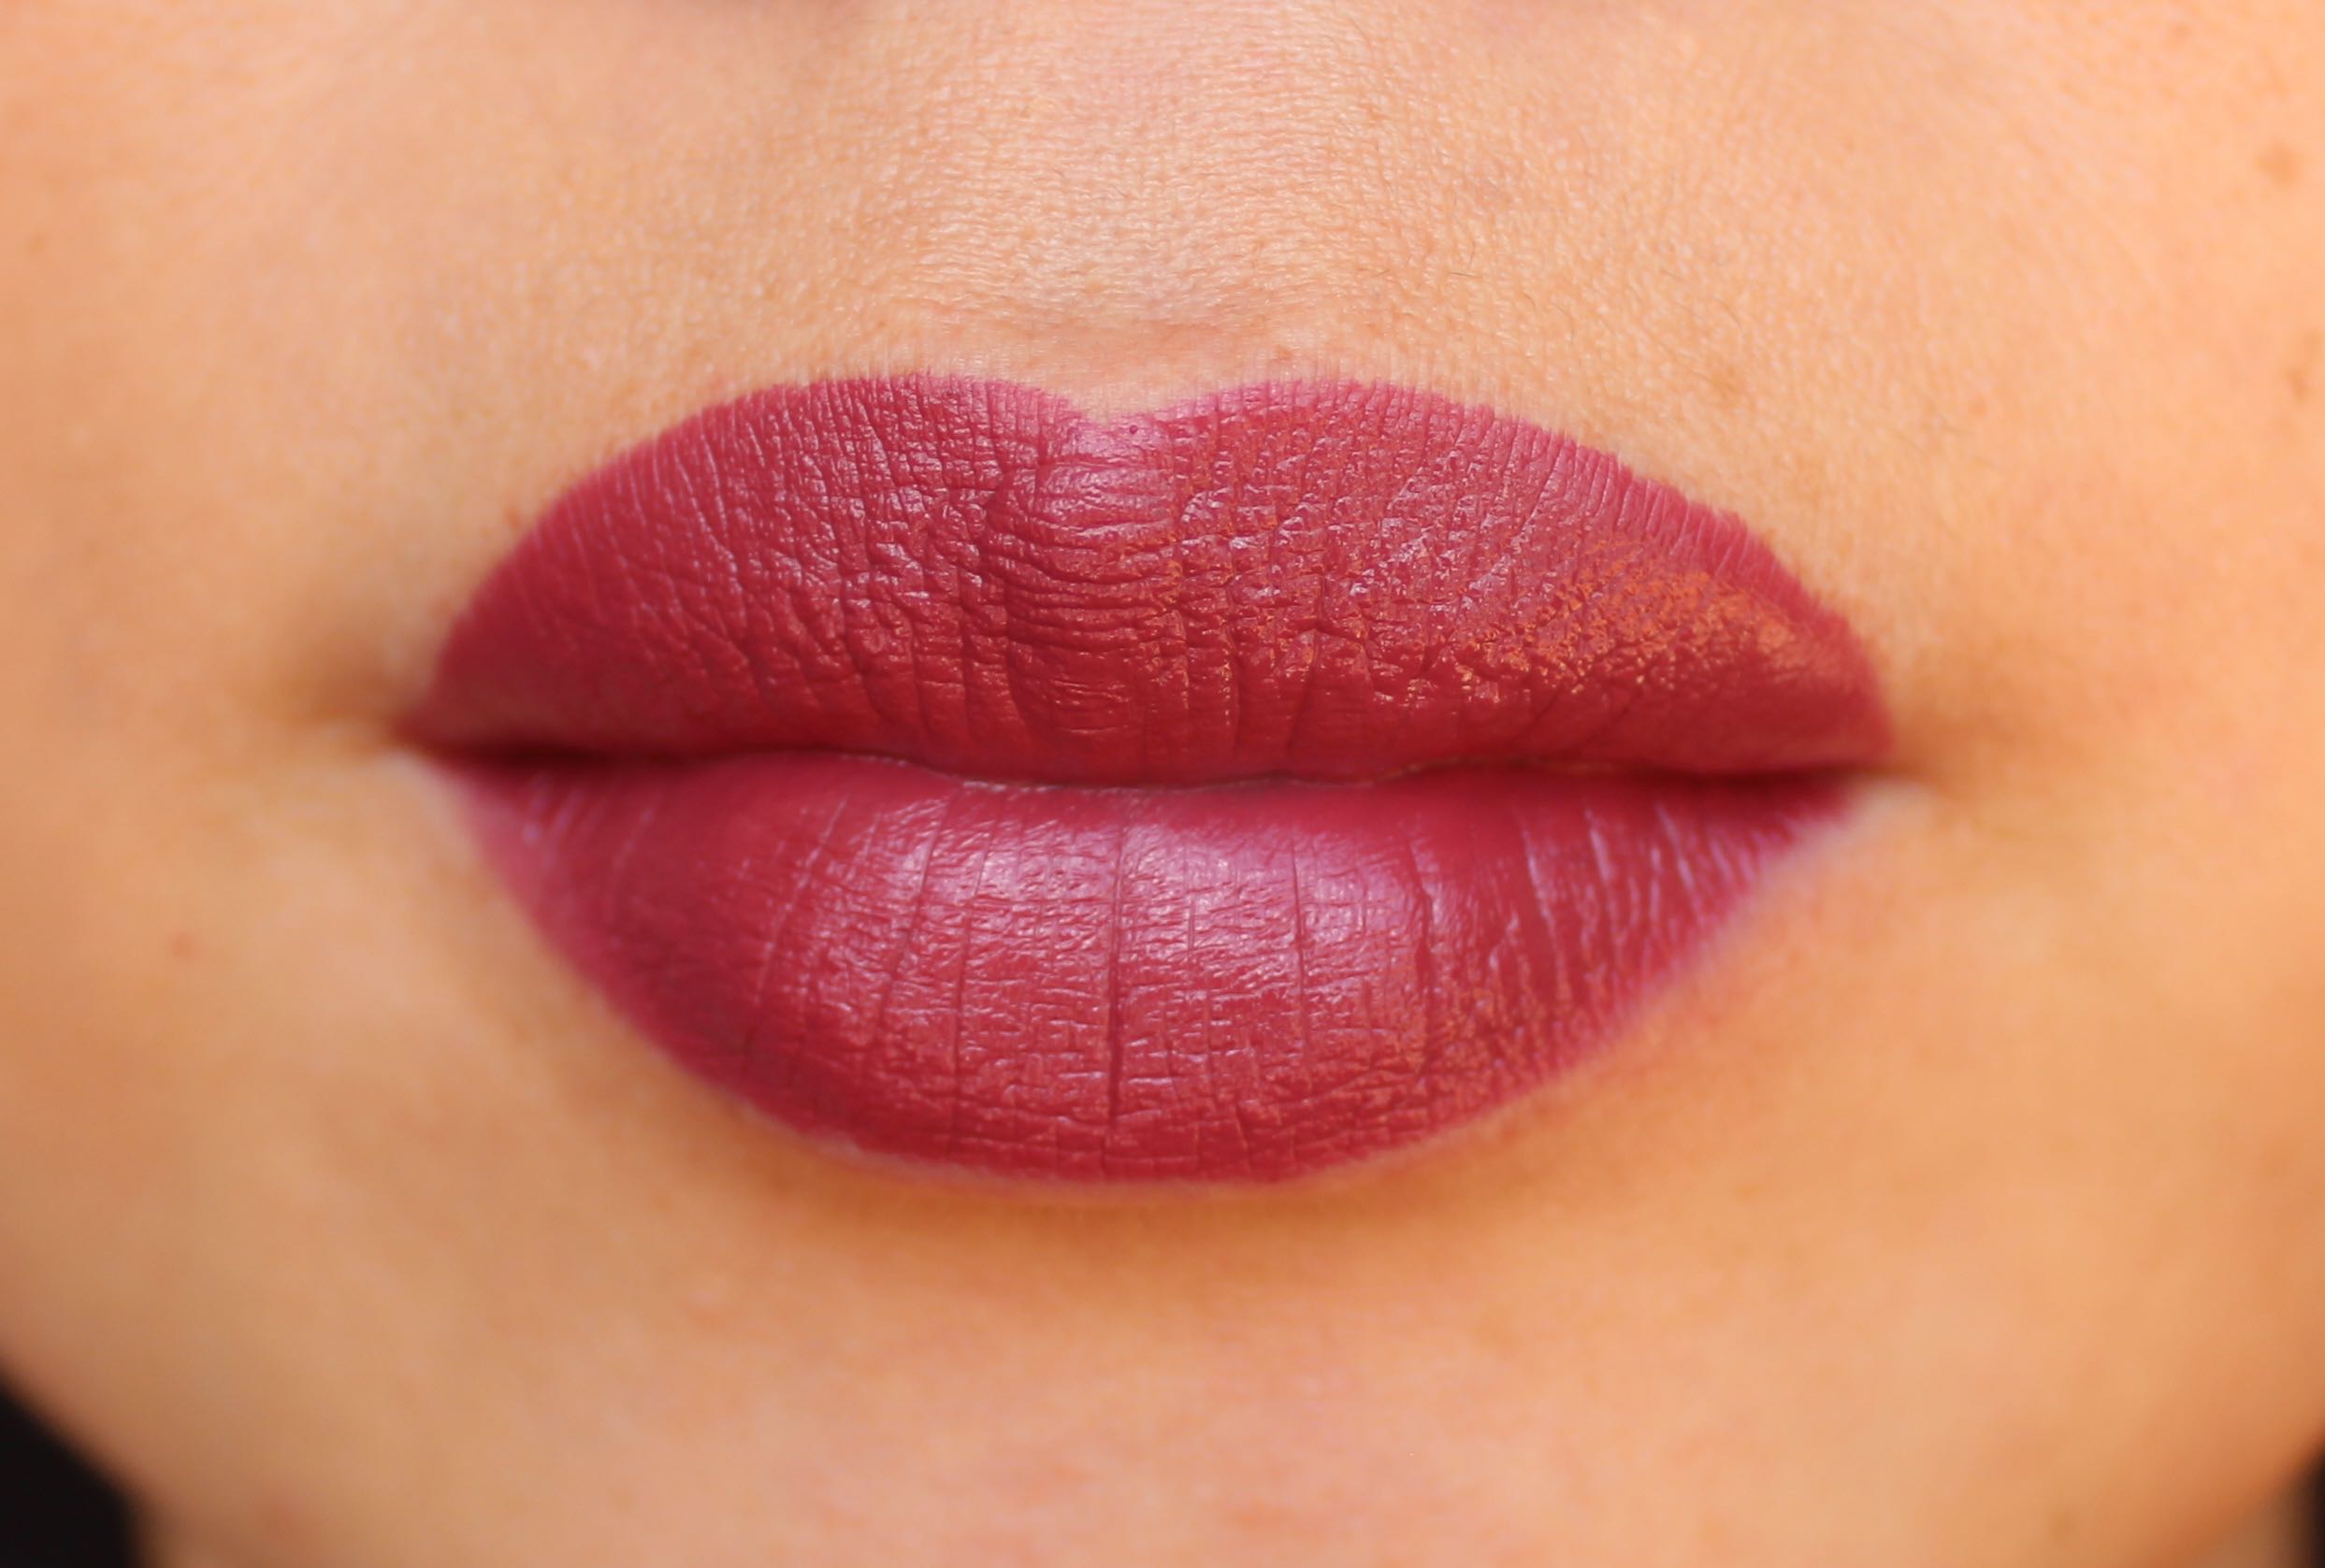 Nars Audacious Lipstick Review & Swatches by Facemadeup.com